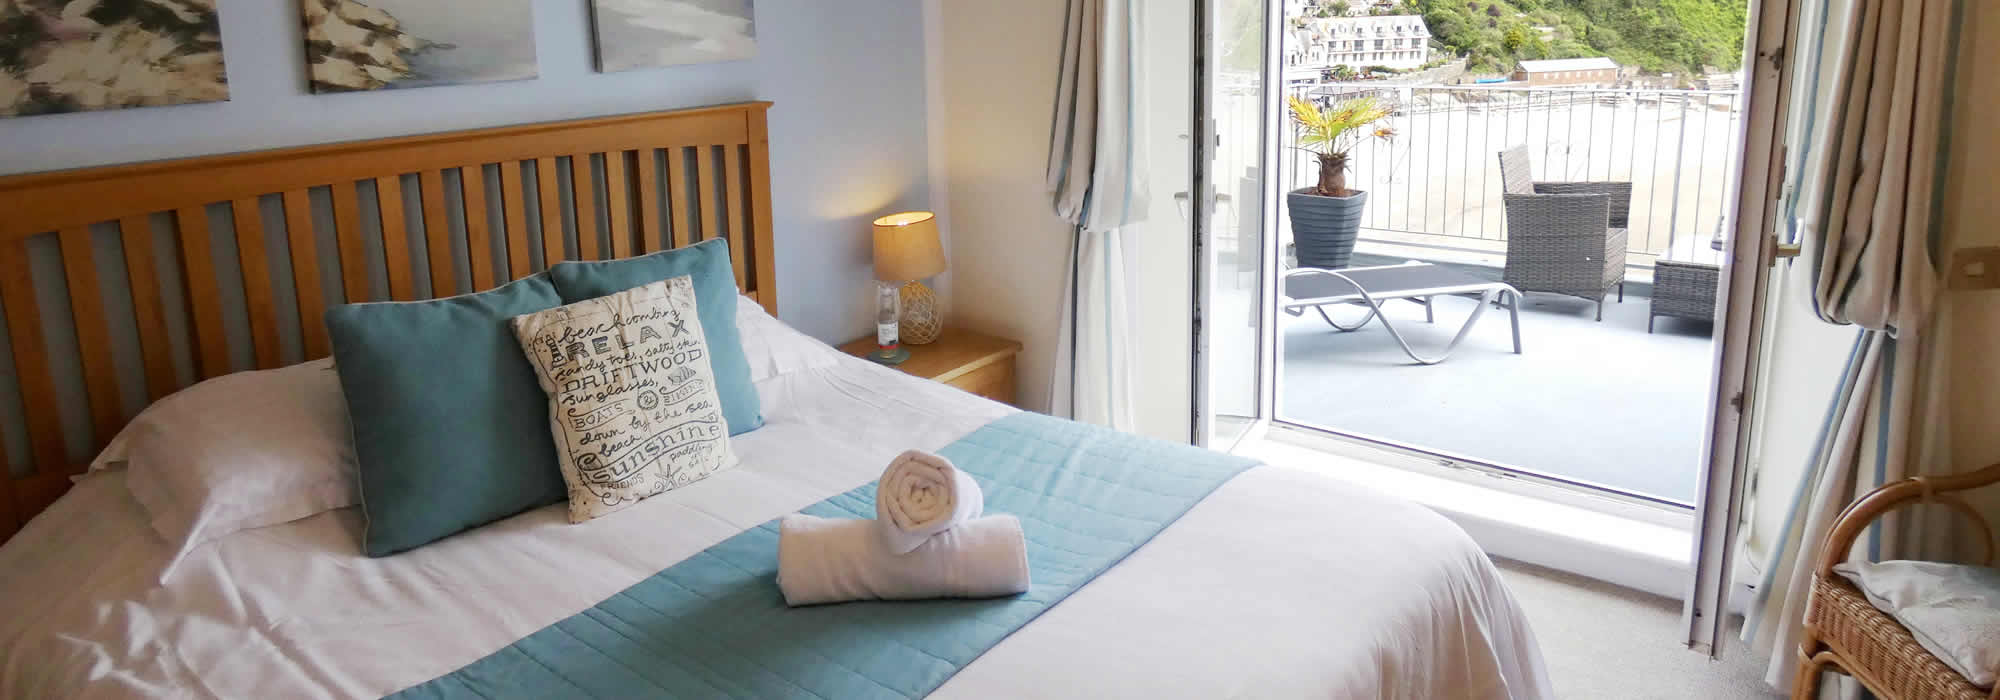 Quality holiday accommodation at The Watermark in Looe, Cornwall